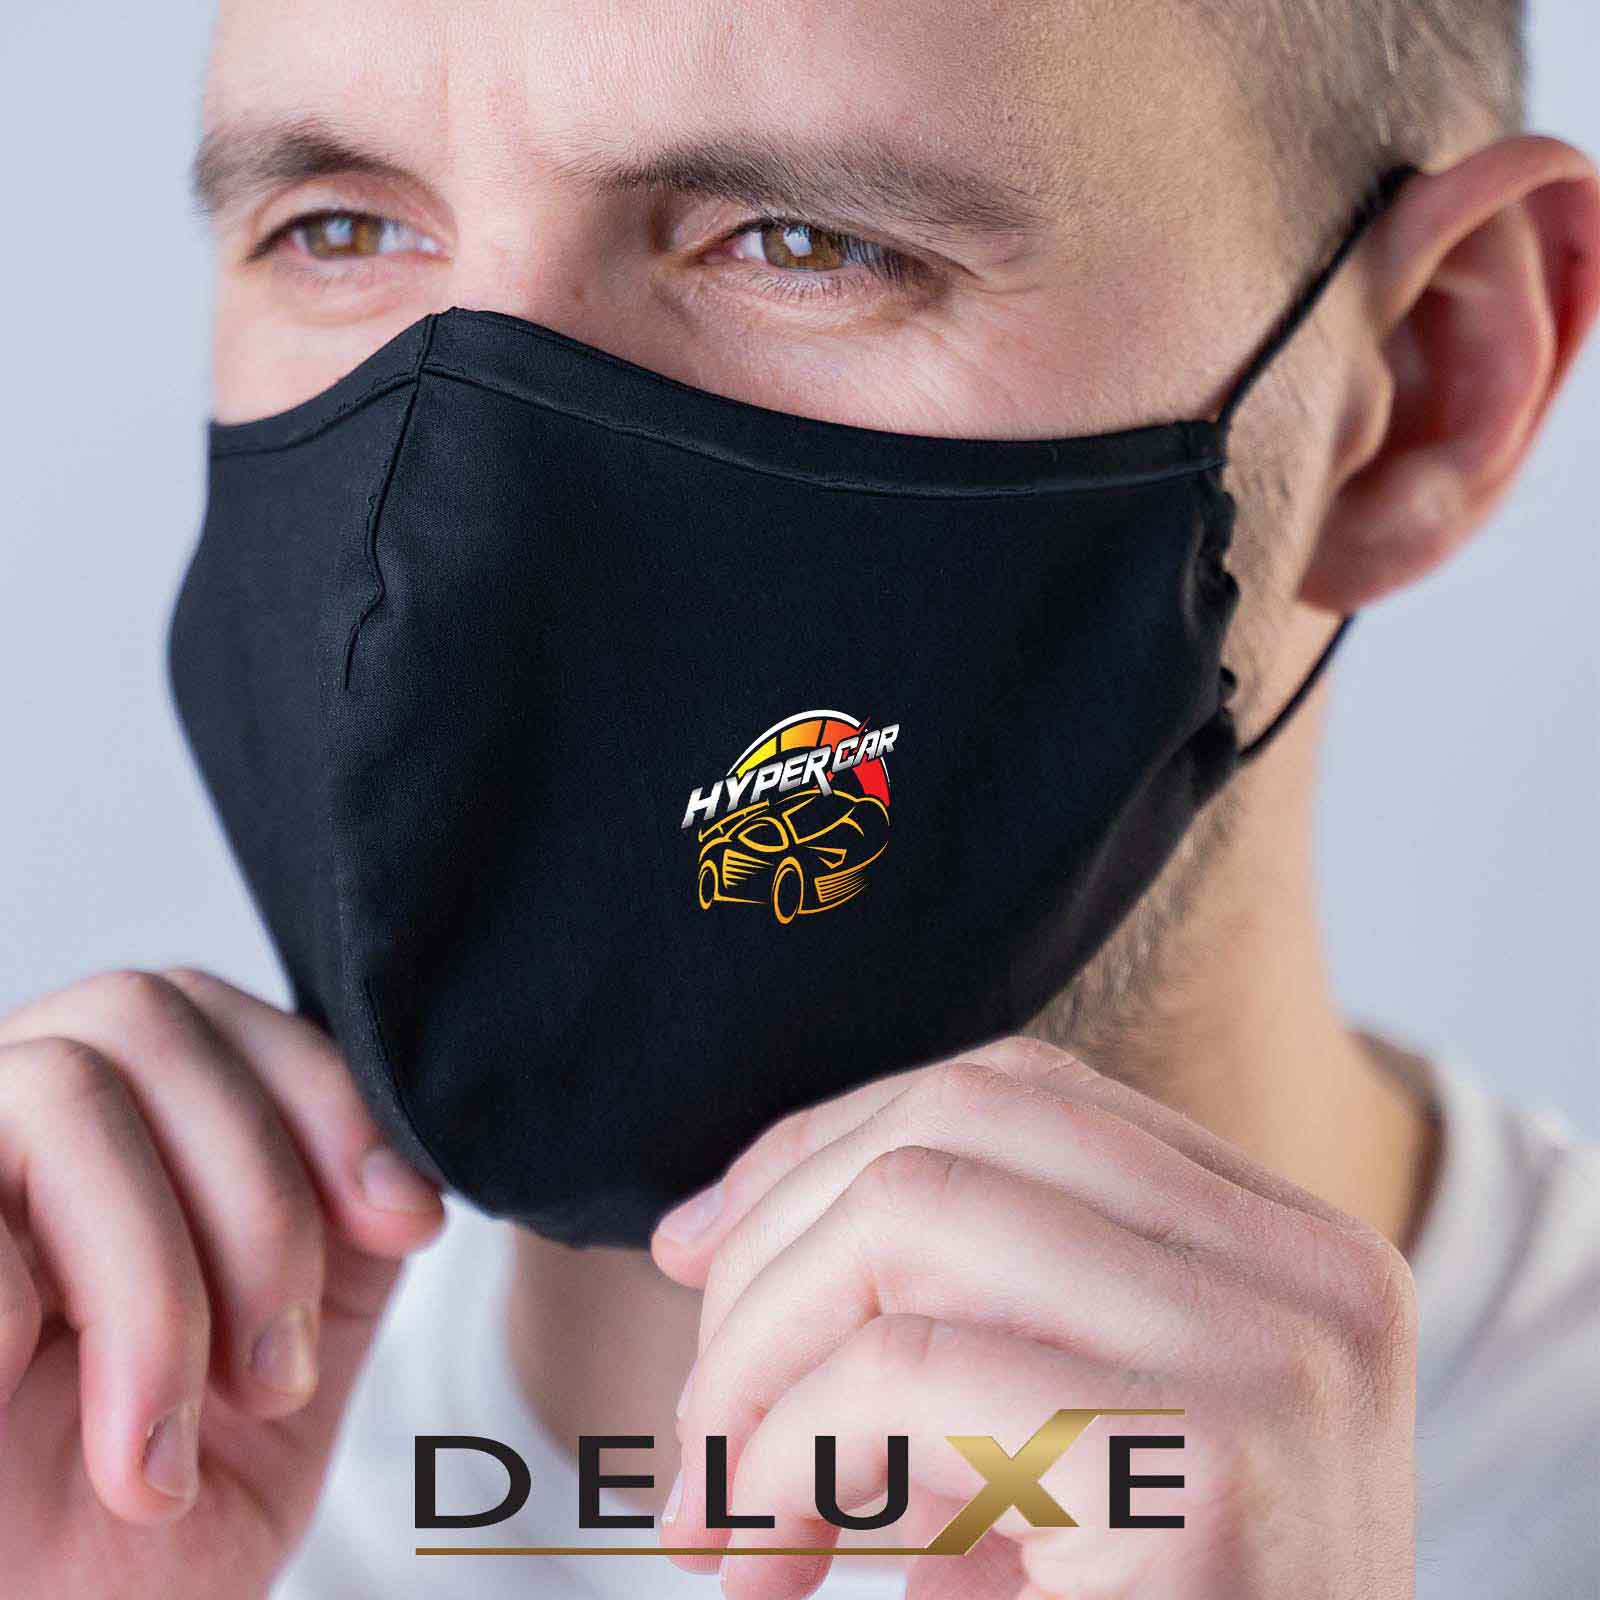 Promotional Deluxe Face Mask Online In Perth